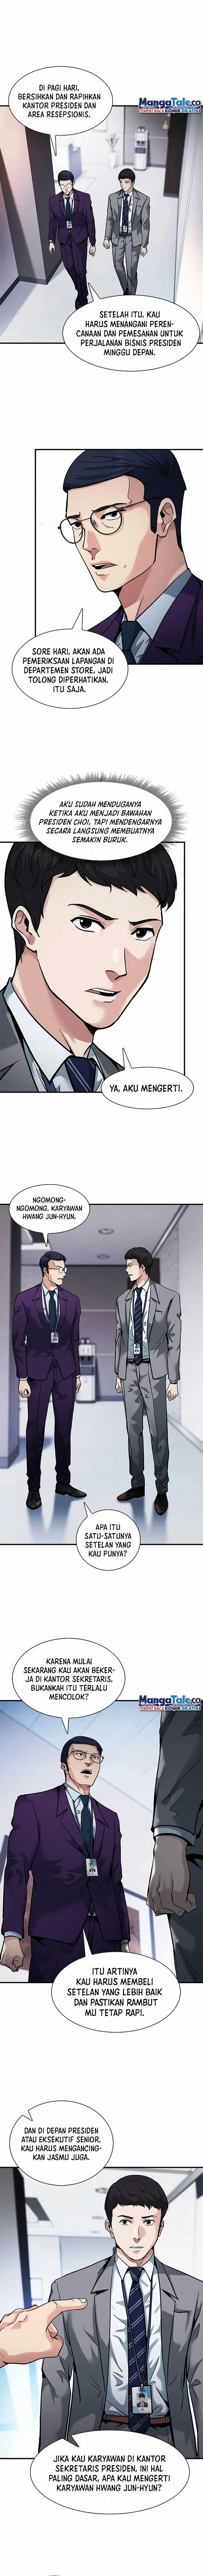 Chairman Kang, The New Employee Chapter 13